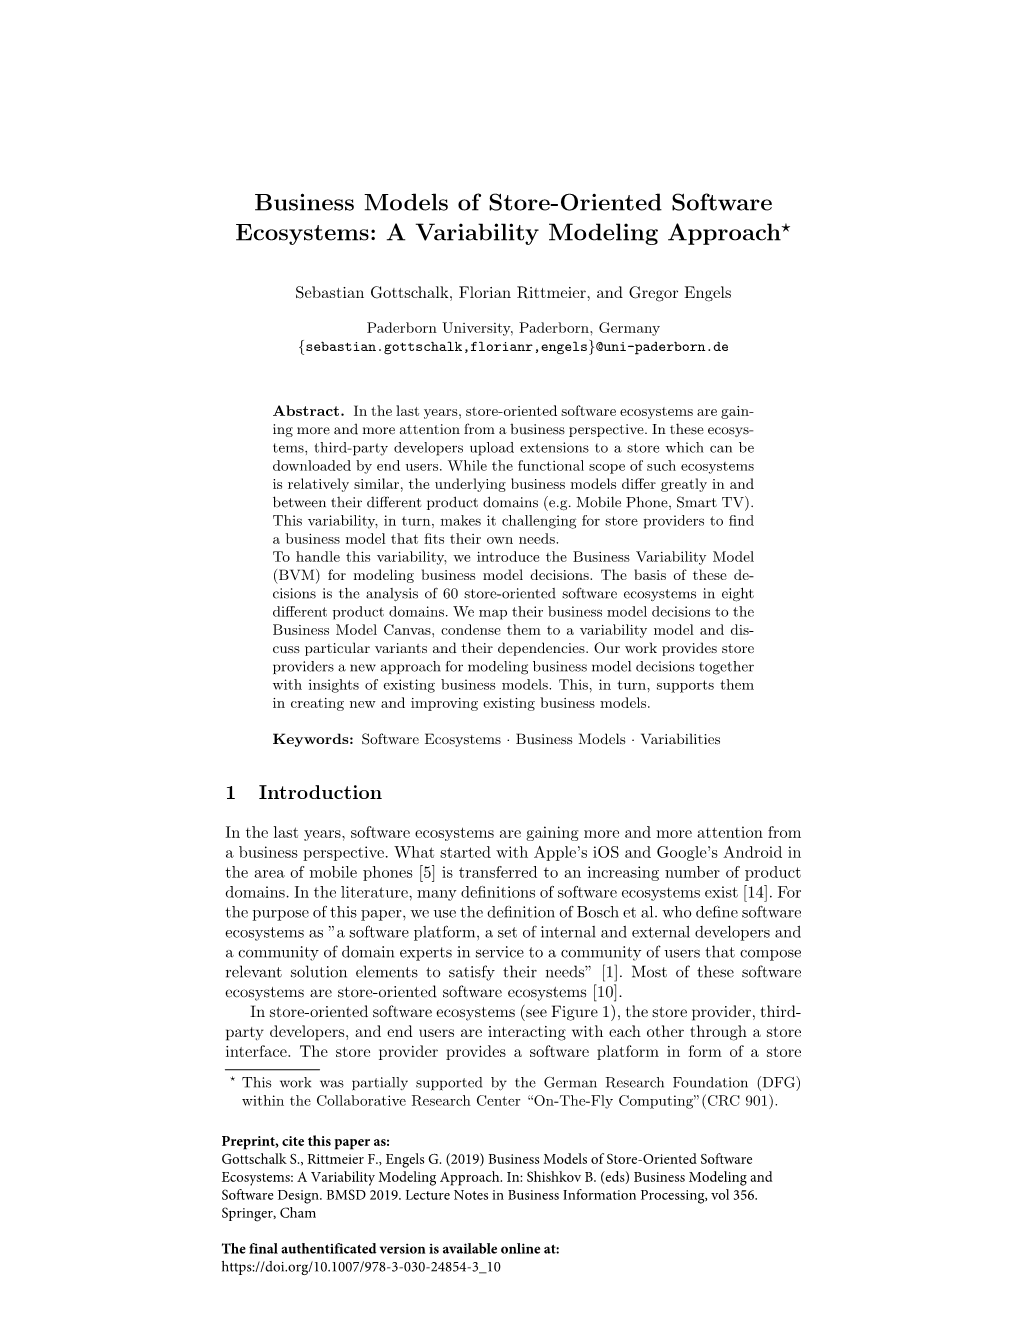 Business Models of Store-Oriented Software Ecosystems: a Variability Modeling Approach?